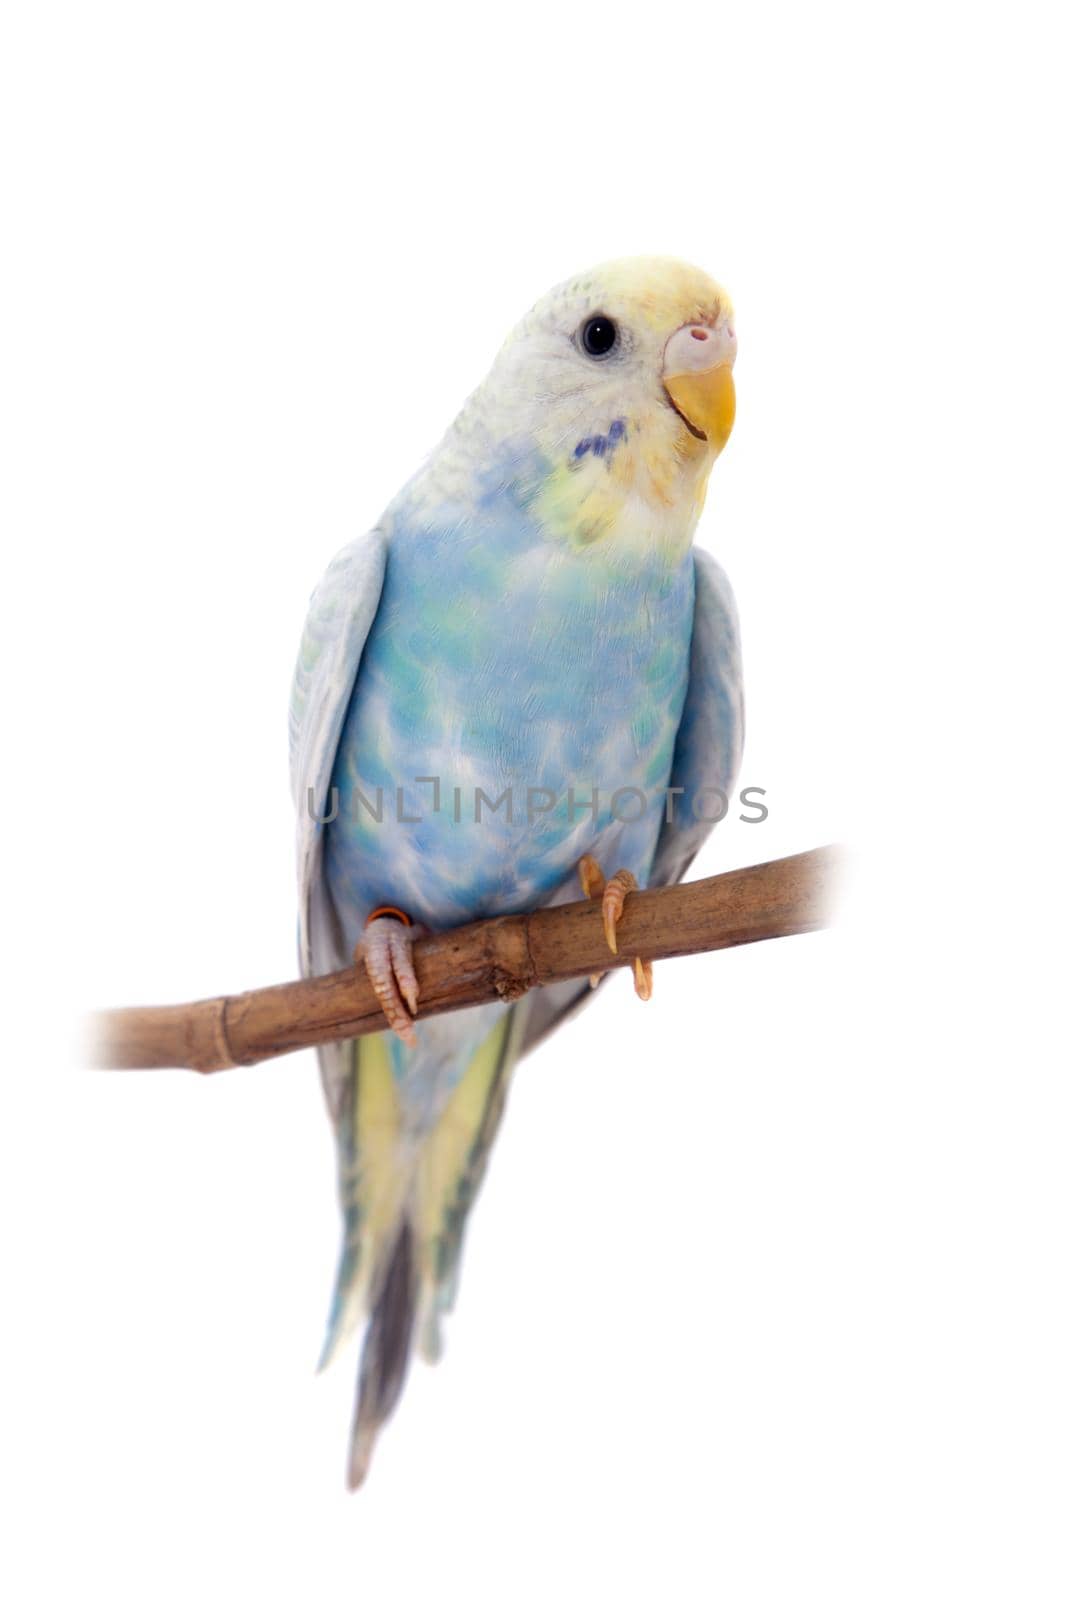 Rawinbow budgerigar on white by RosaJay